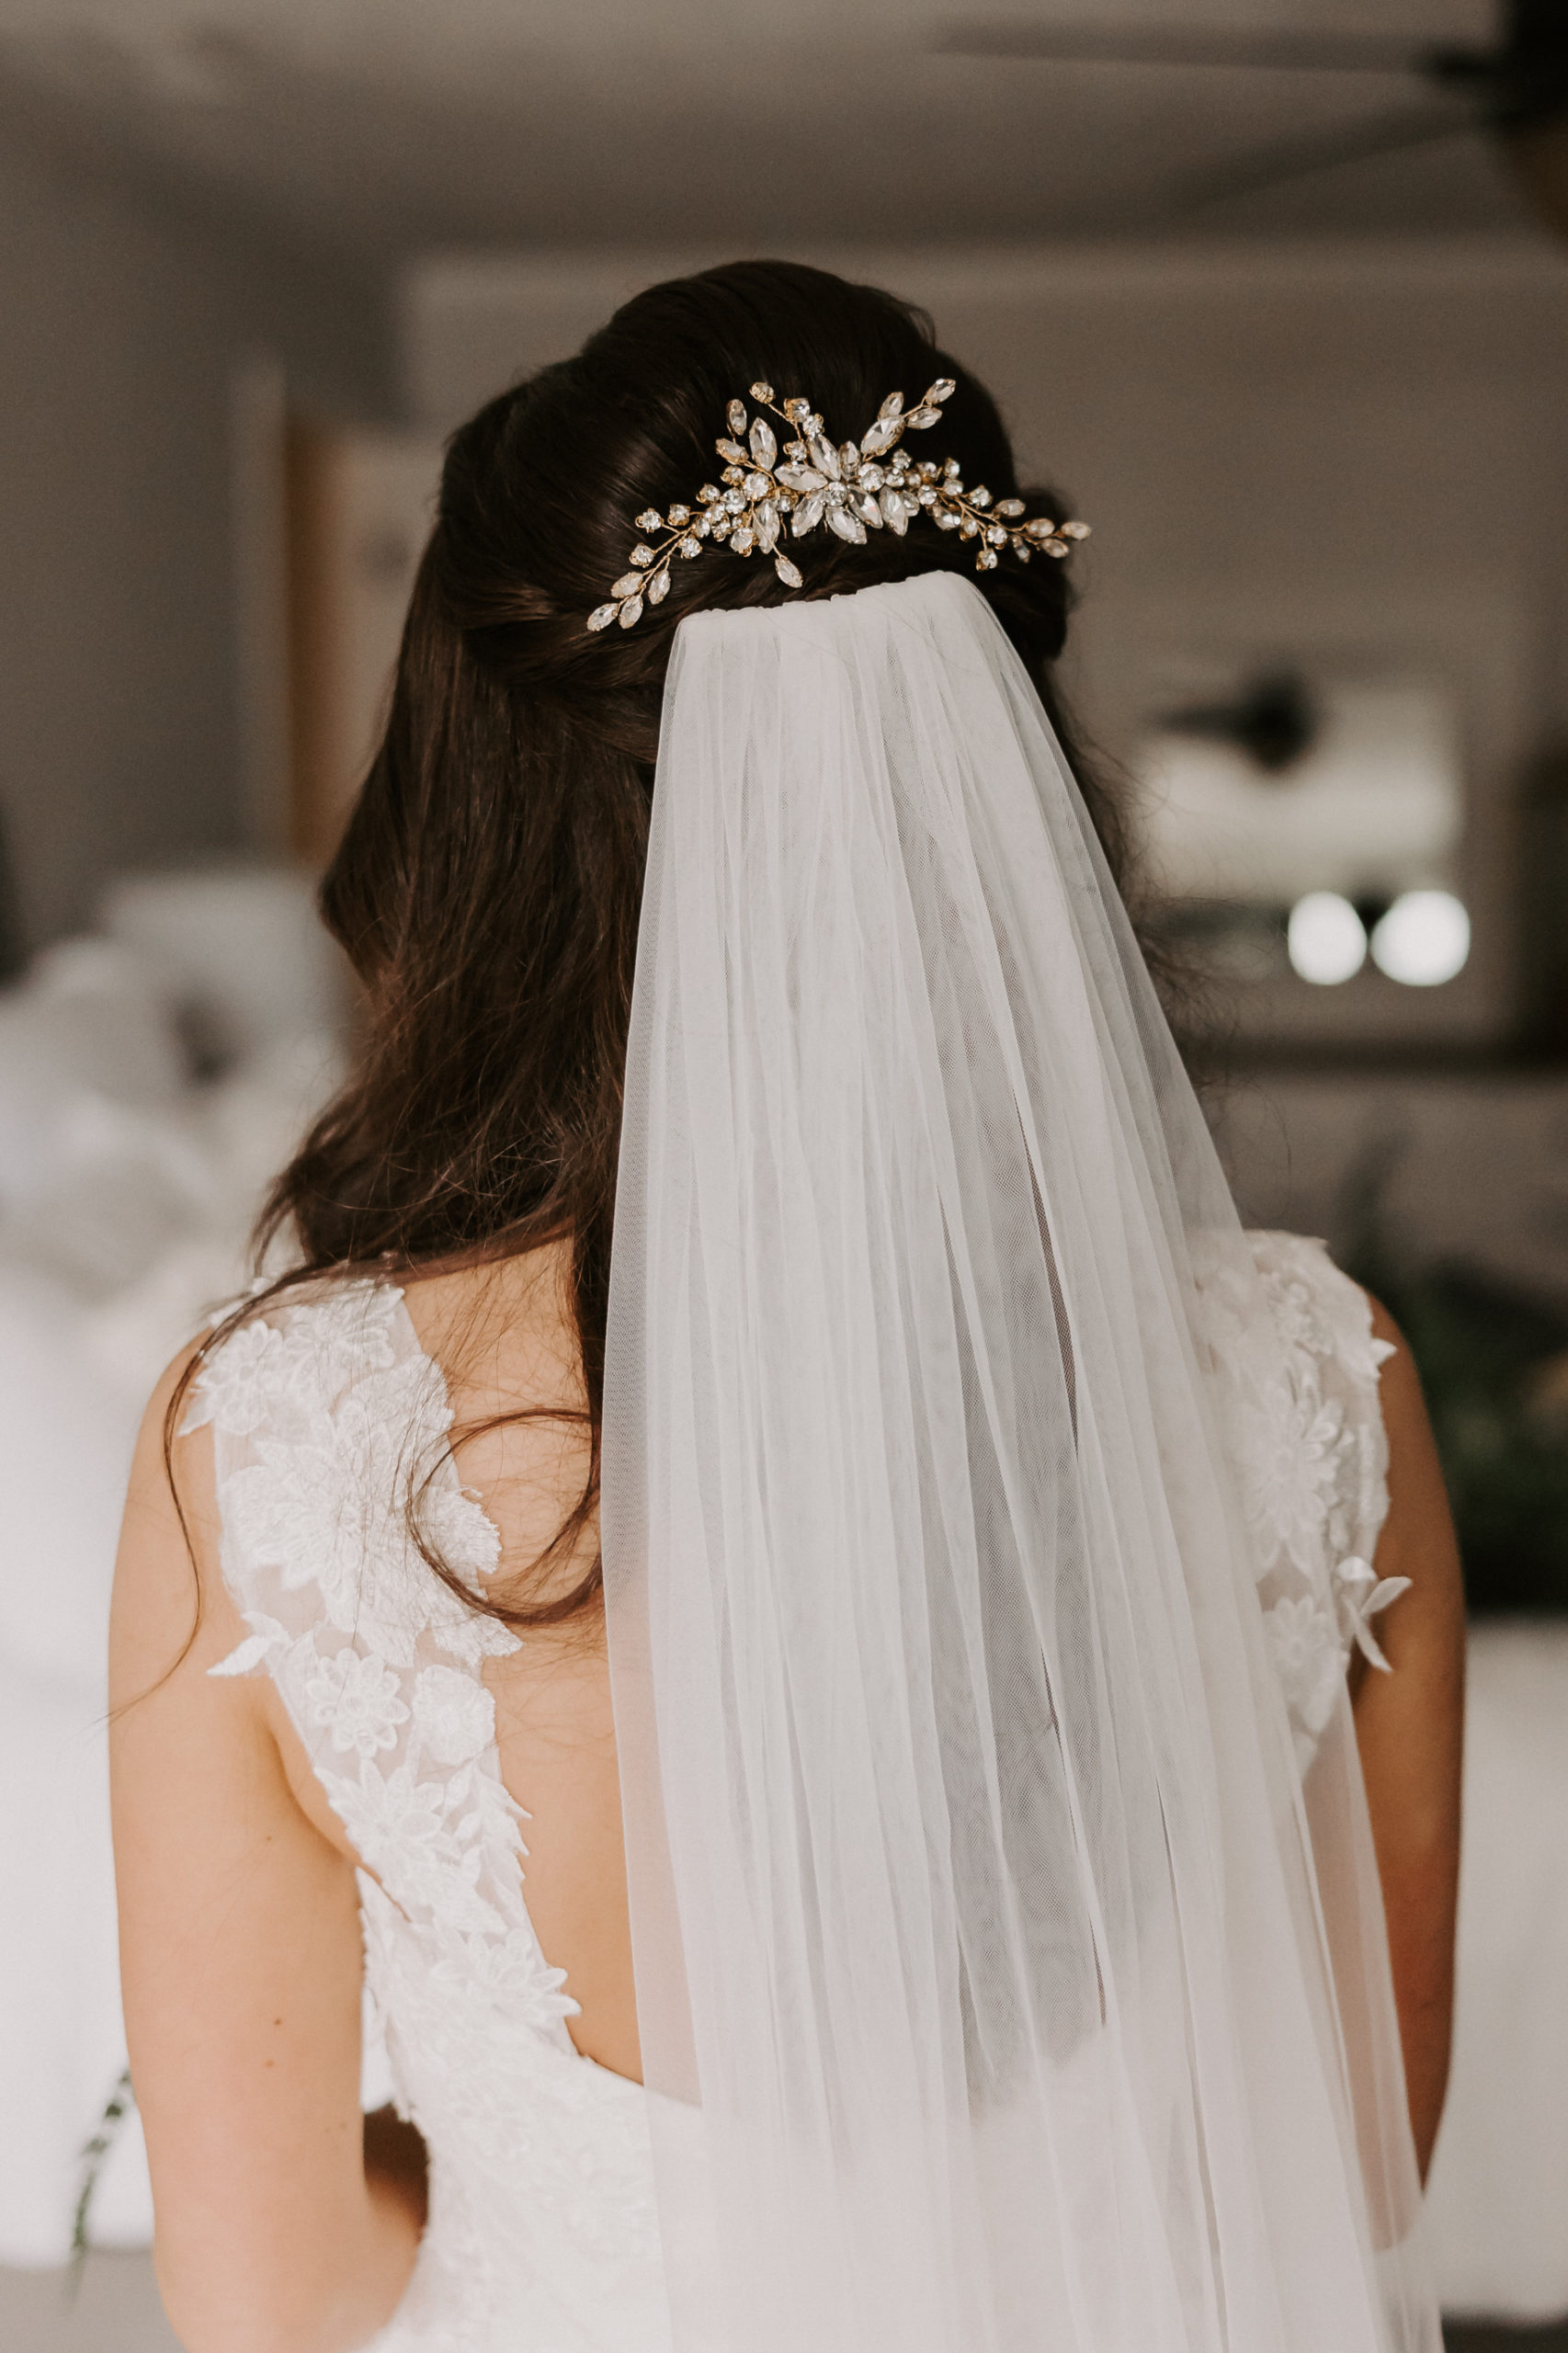 She completed her modern bridal look with a veil coupled with a head piece that gave the perfect finishing touch for  their intimate celebration.